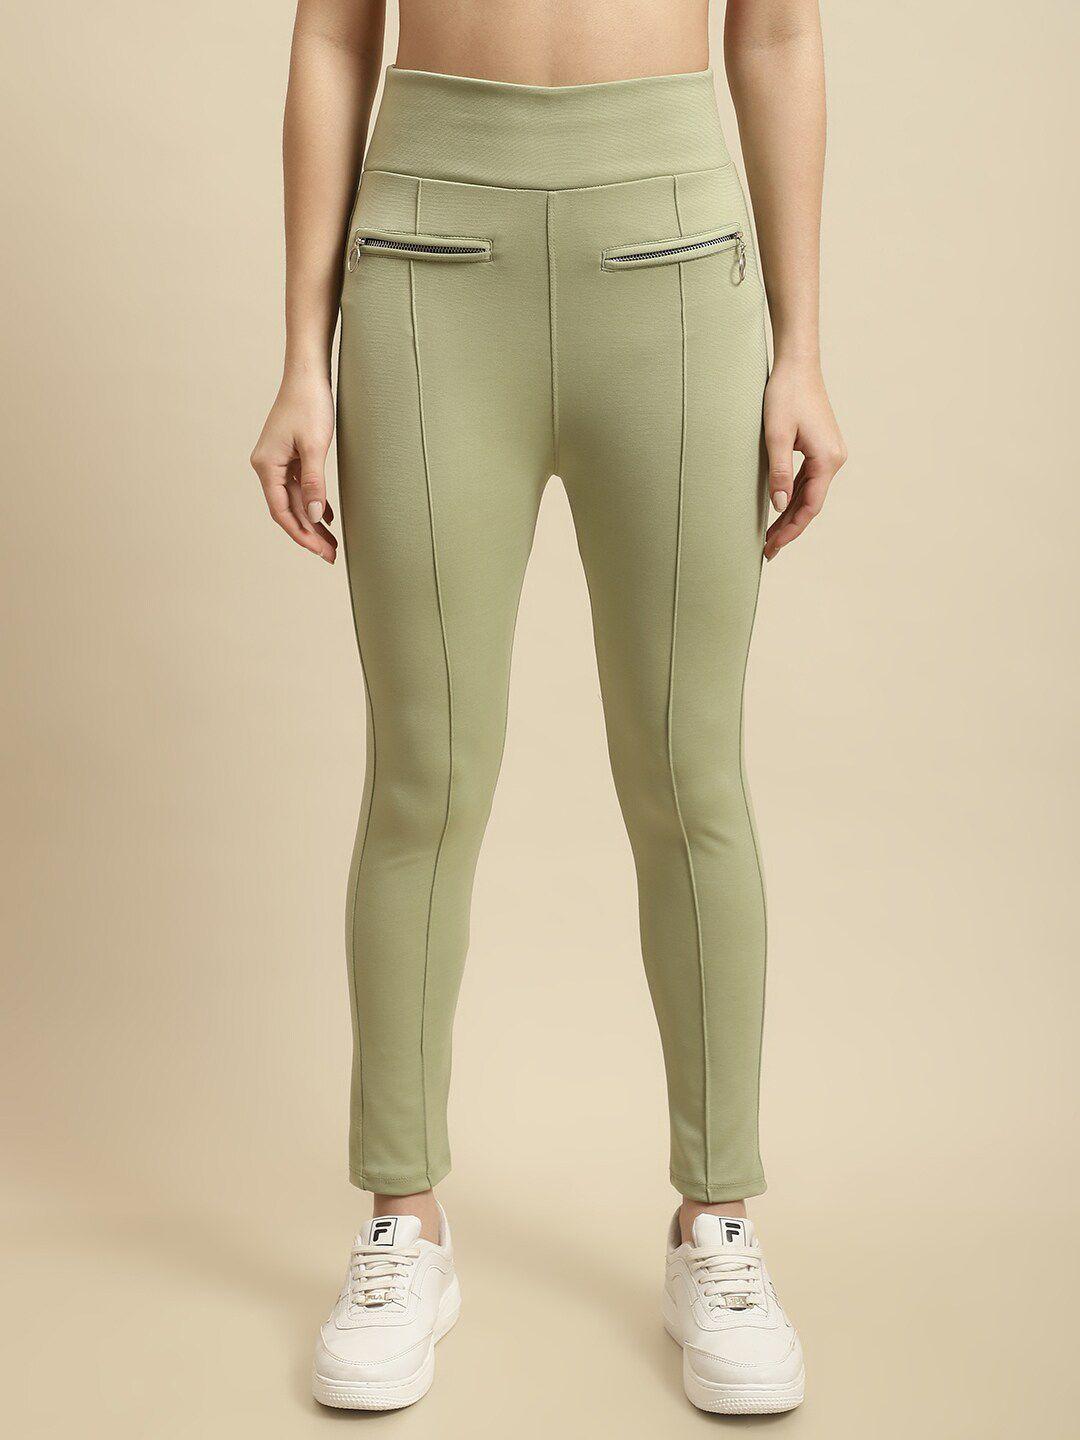 tag-7-women-skinny-fit-ankle-length-jeggings